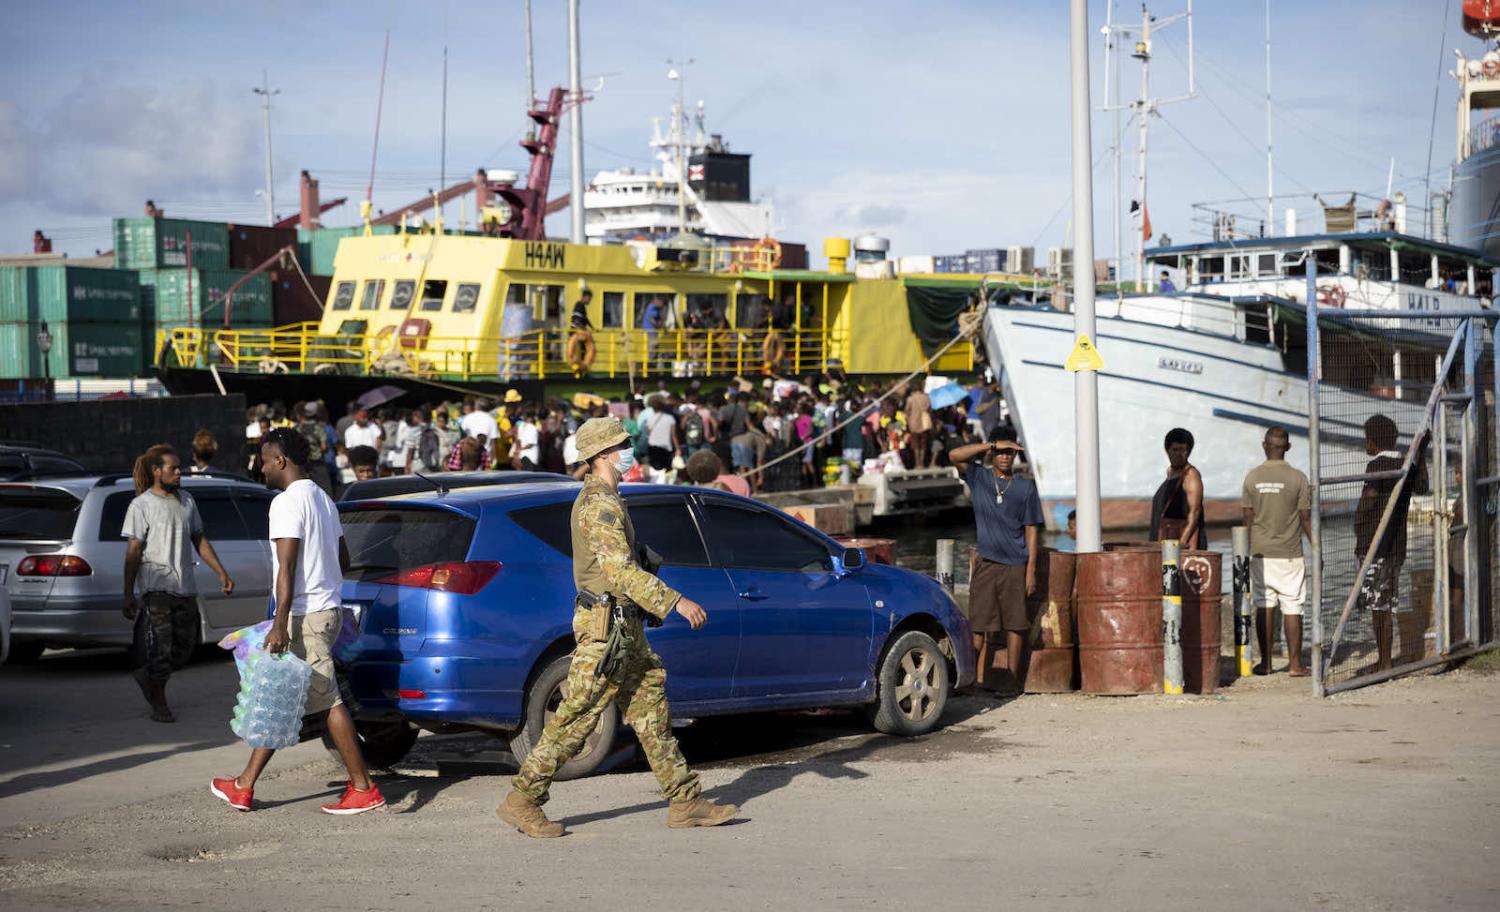 Patrols at the Port of Honiara, Solomon Islands on 10 December (Defence Department)